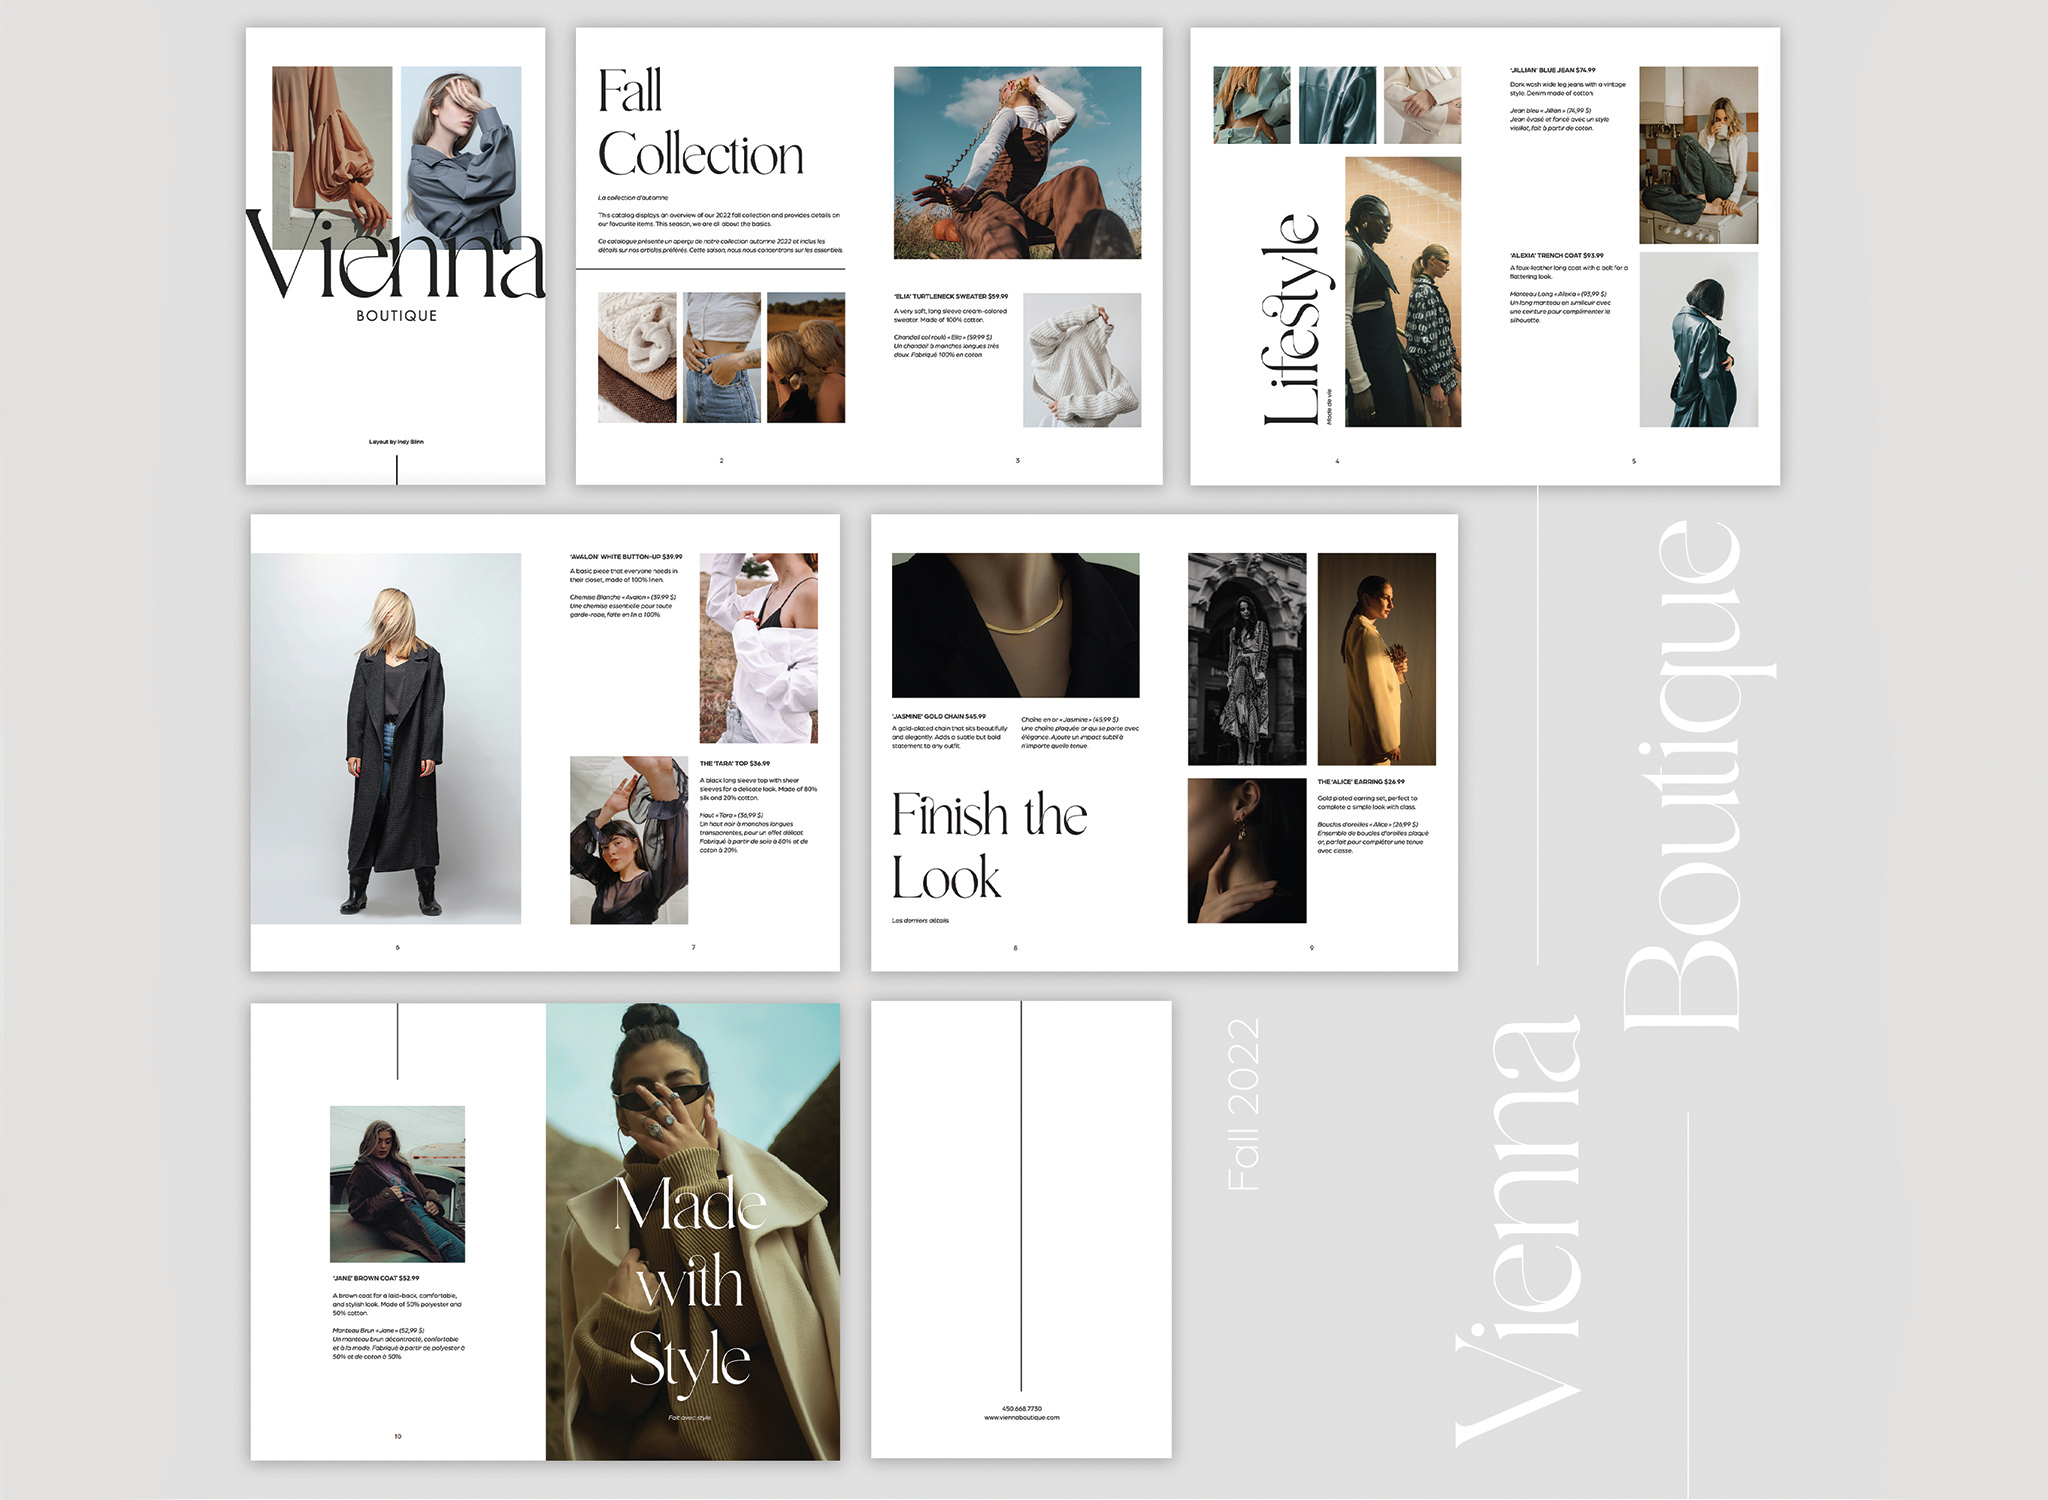 Overview of all the spreads I designed for the Fall 2022 Vienna Boutique fashion catalog. The spreads display large images on a white background, along with minimal text.